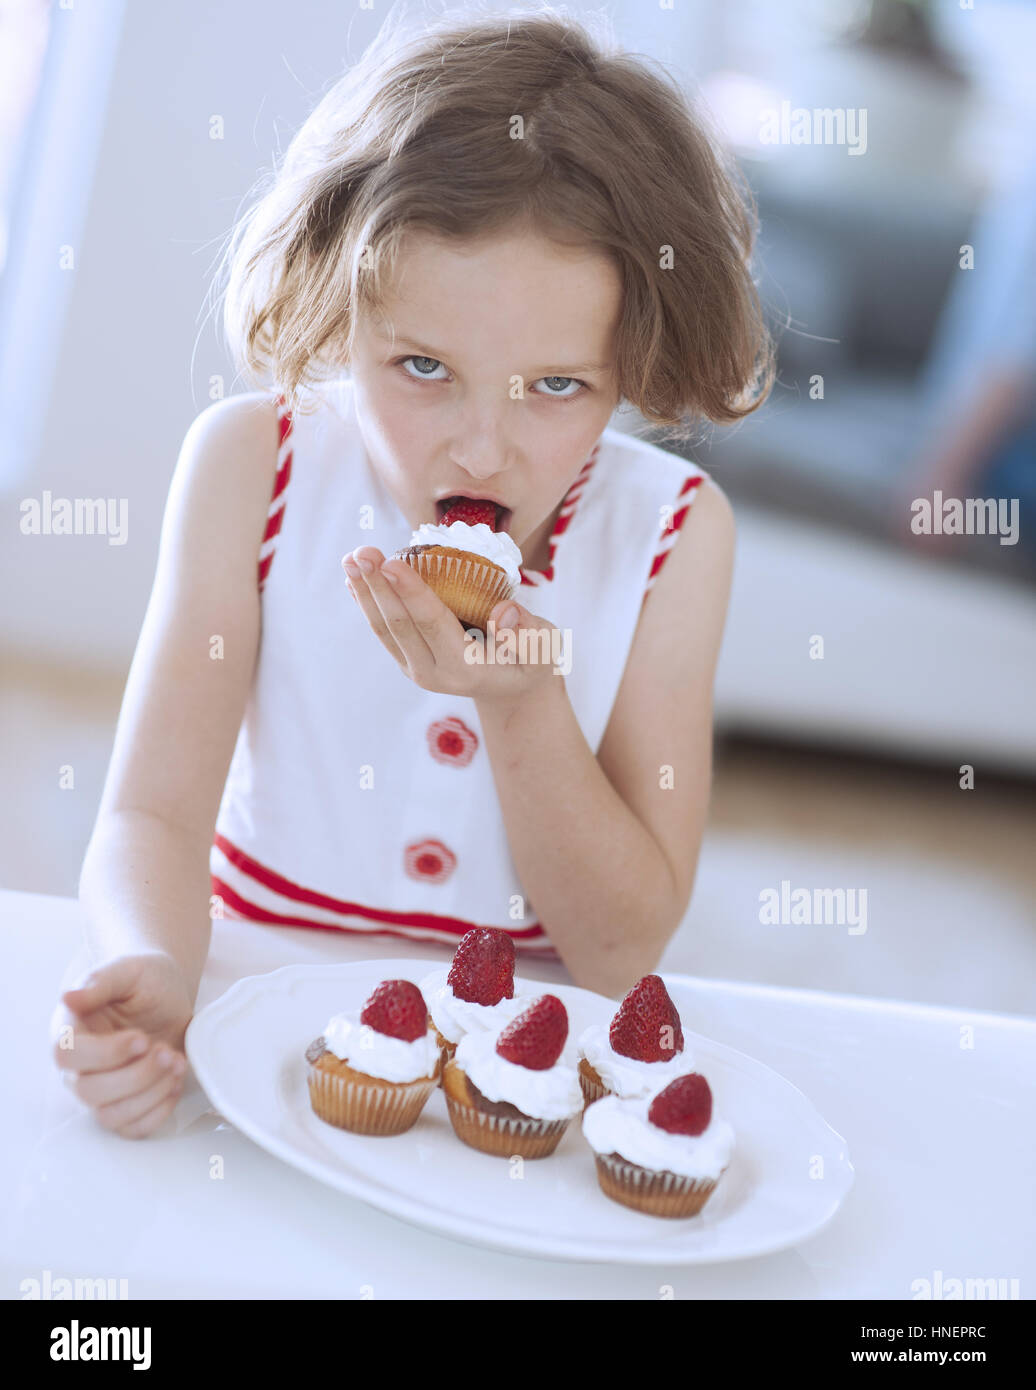 Young Girl eating cup cake Banque D'Images